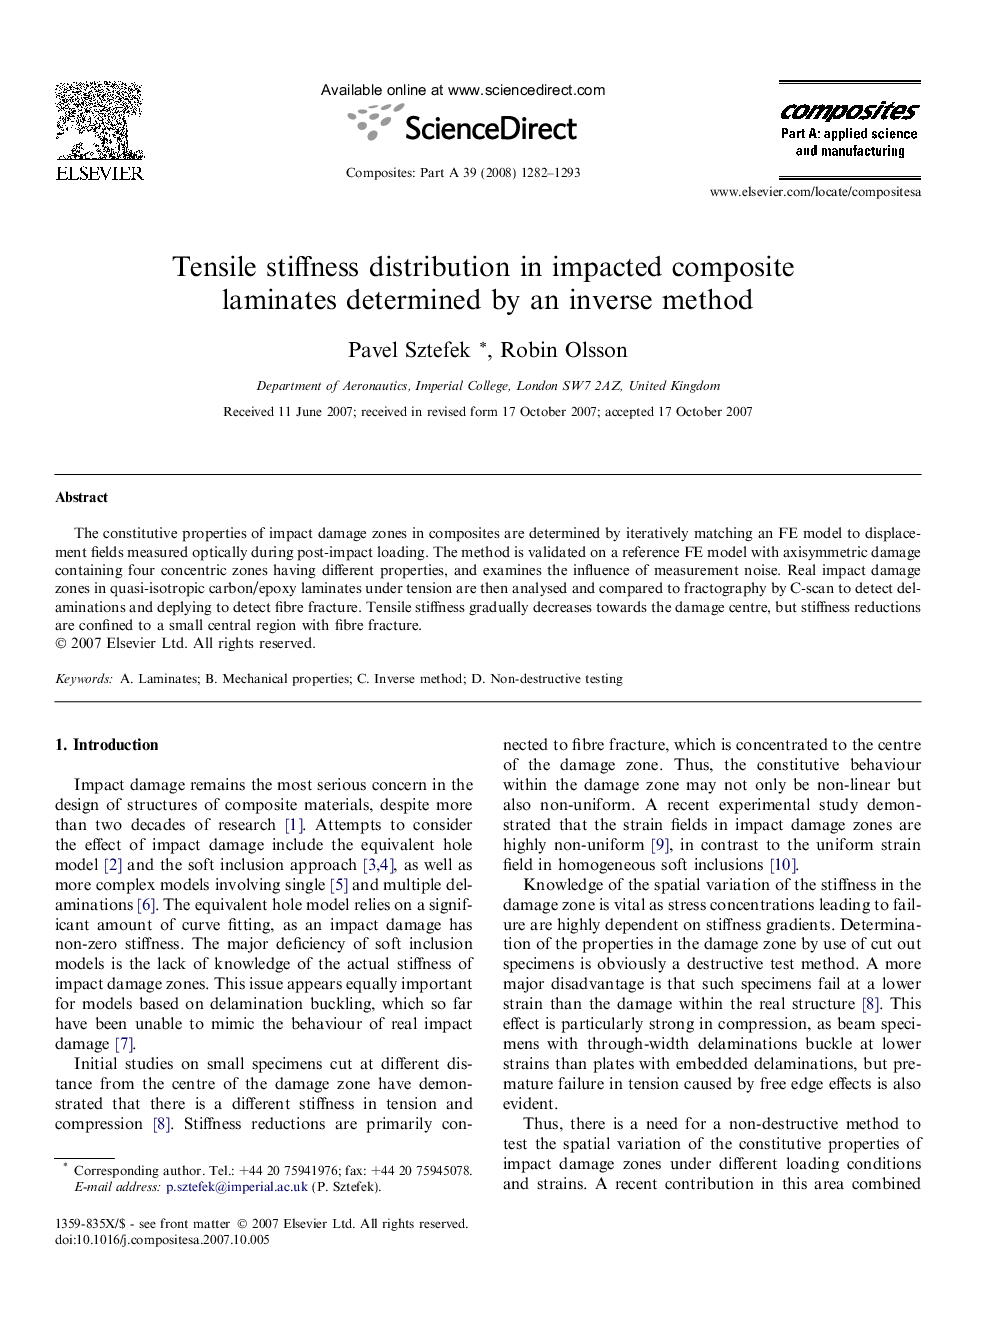 Tensile stiffness distribution in impacted composite laminates determined by an inverse method